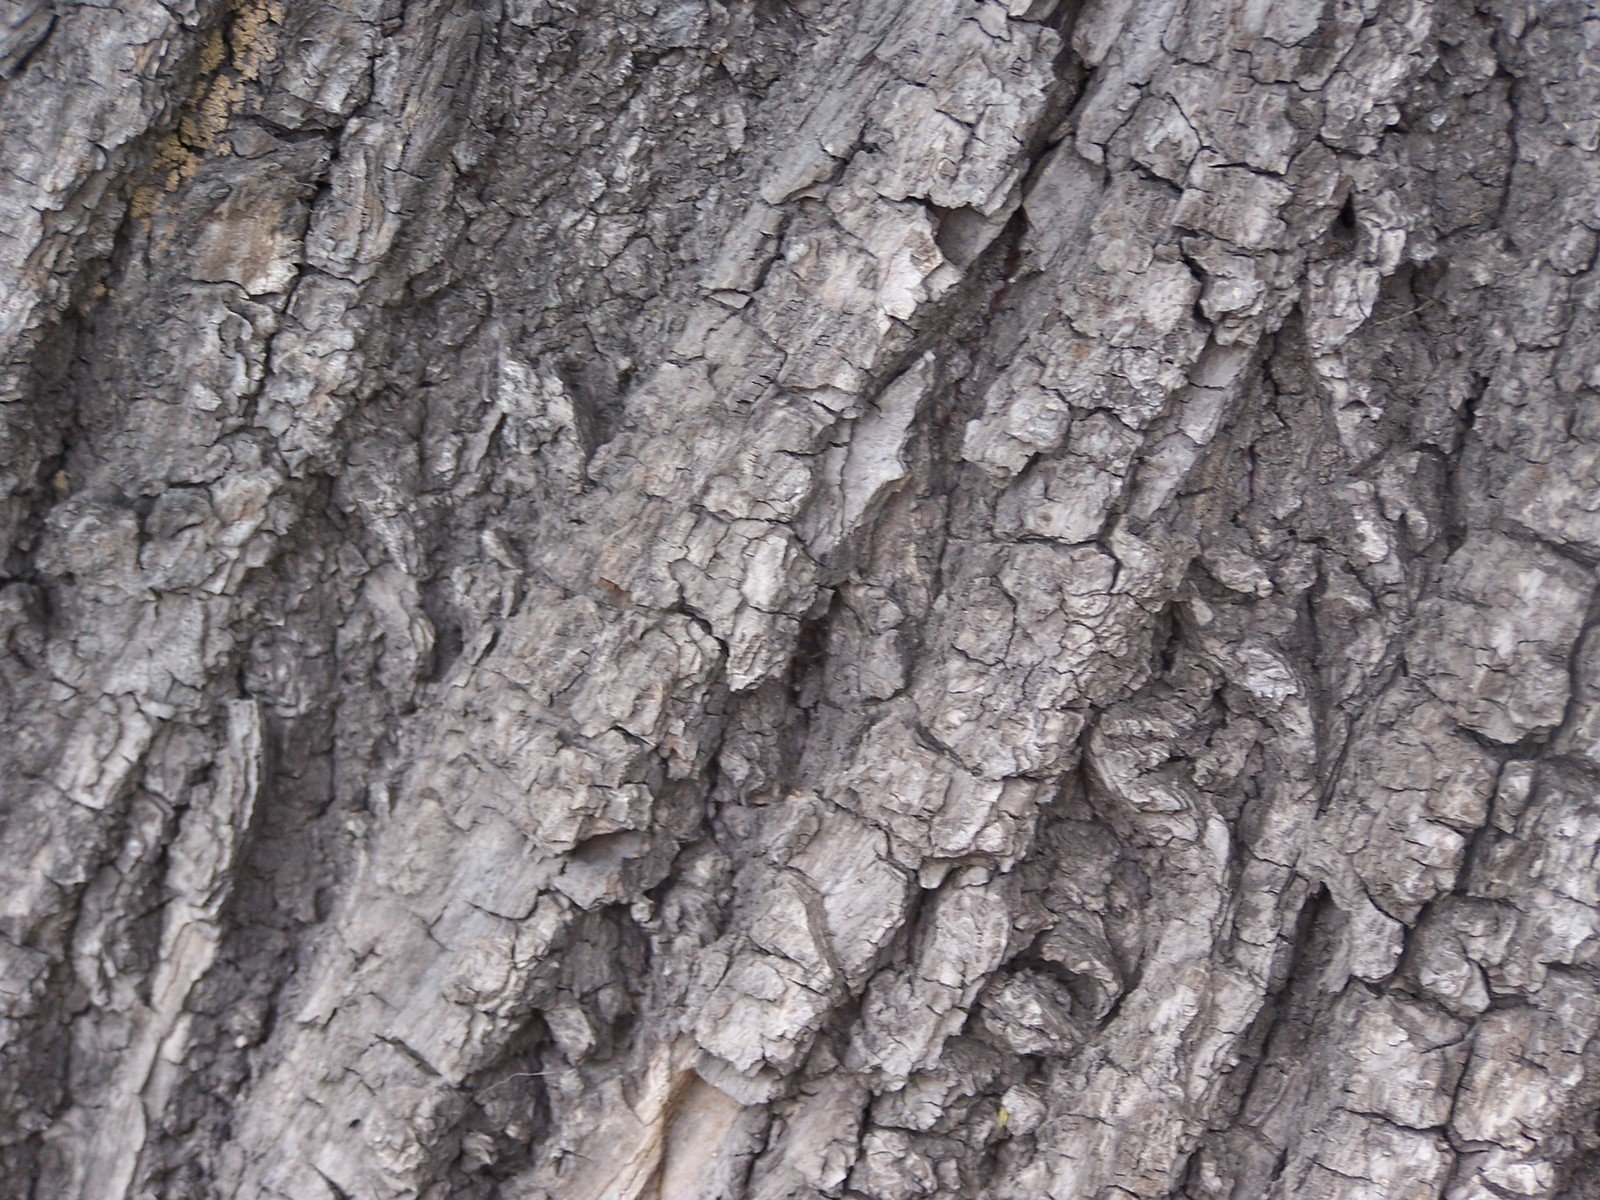 tree bark showing the brown - colored bark, and other thin, overlapping tree leaves